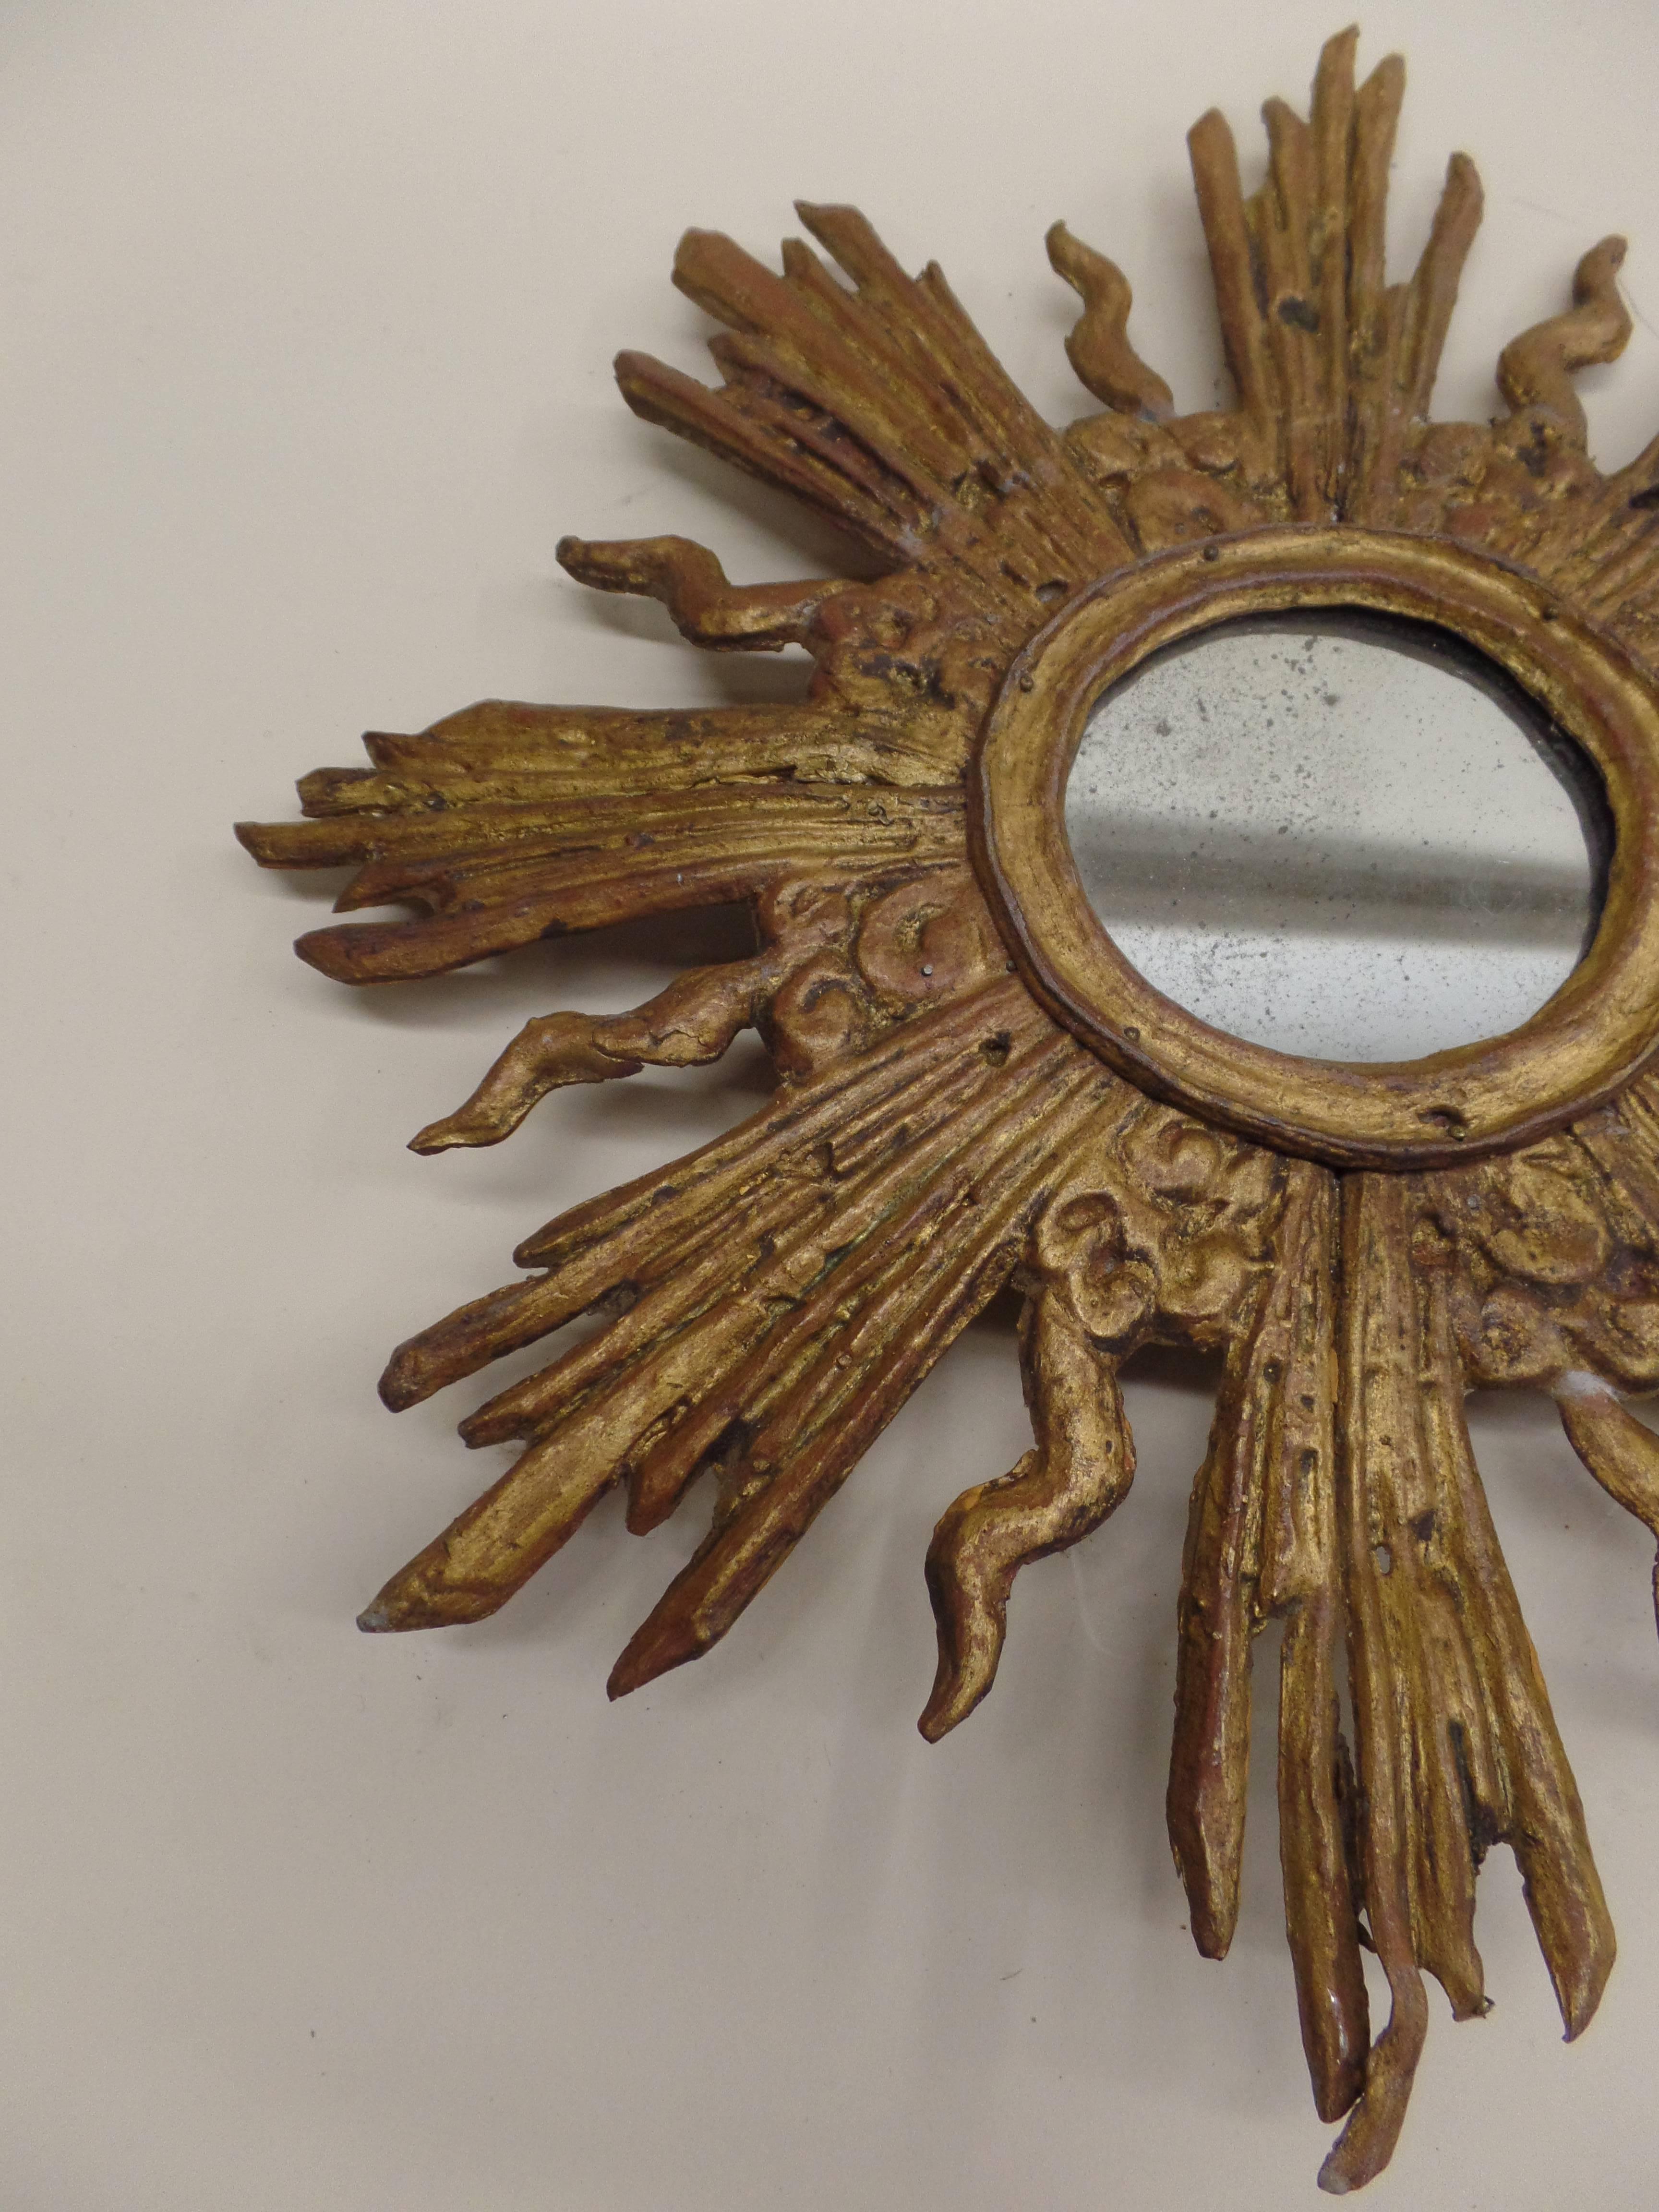 French Modern Neoclassical Gilt Lead Sunburst Mirror Attributed to Maison Jansen For Sale 1